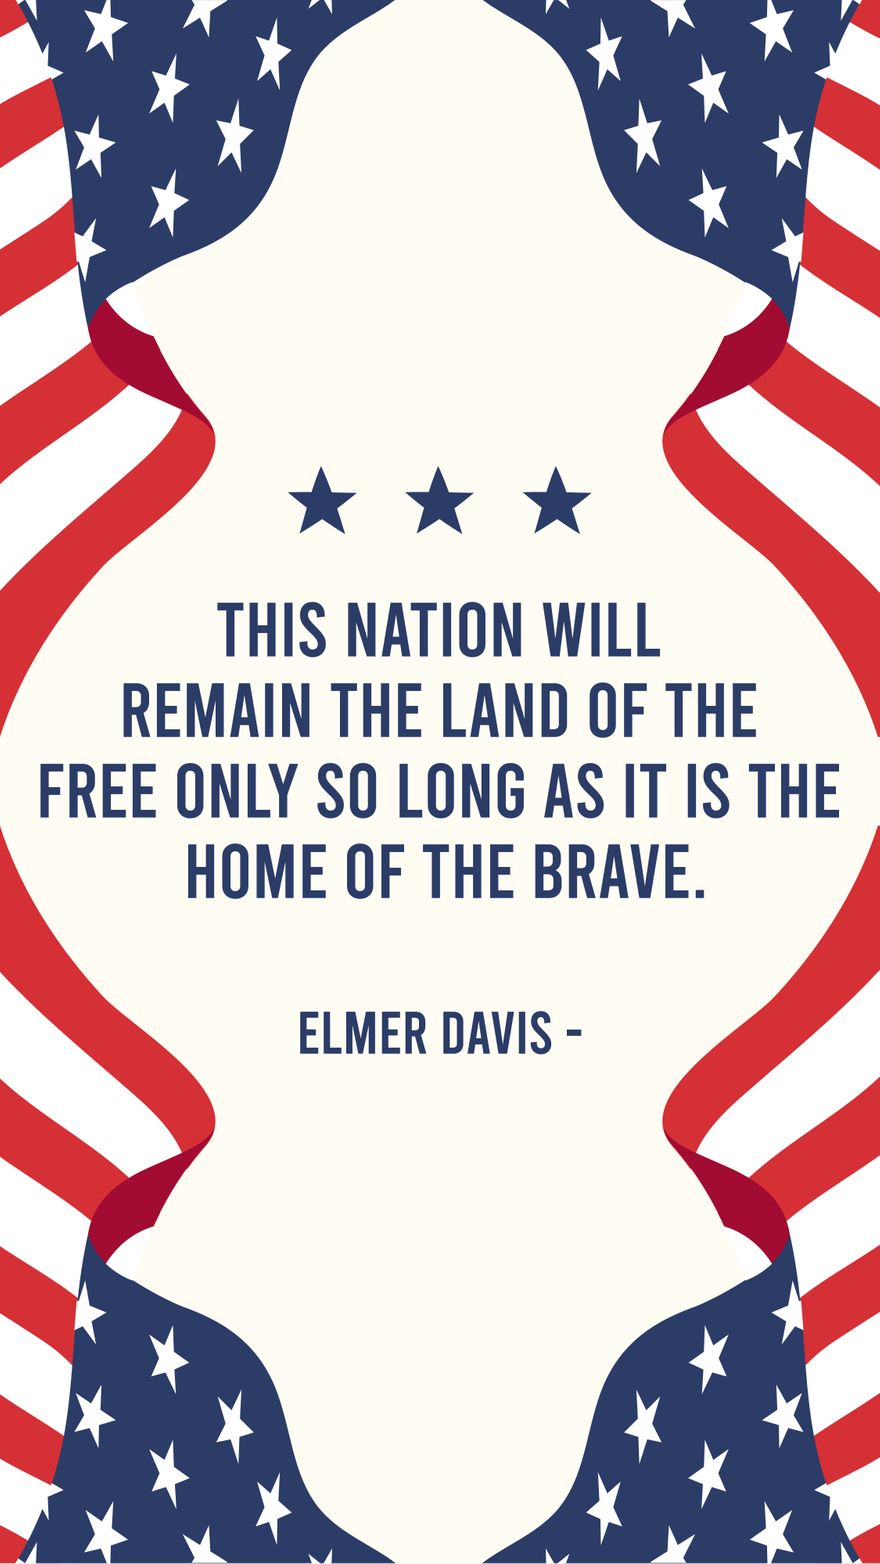 Free Elmer Davis - This nation will remain the land of the free only so long as it is the home of the brave. in JPG